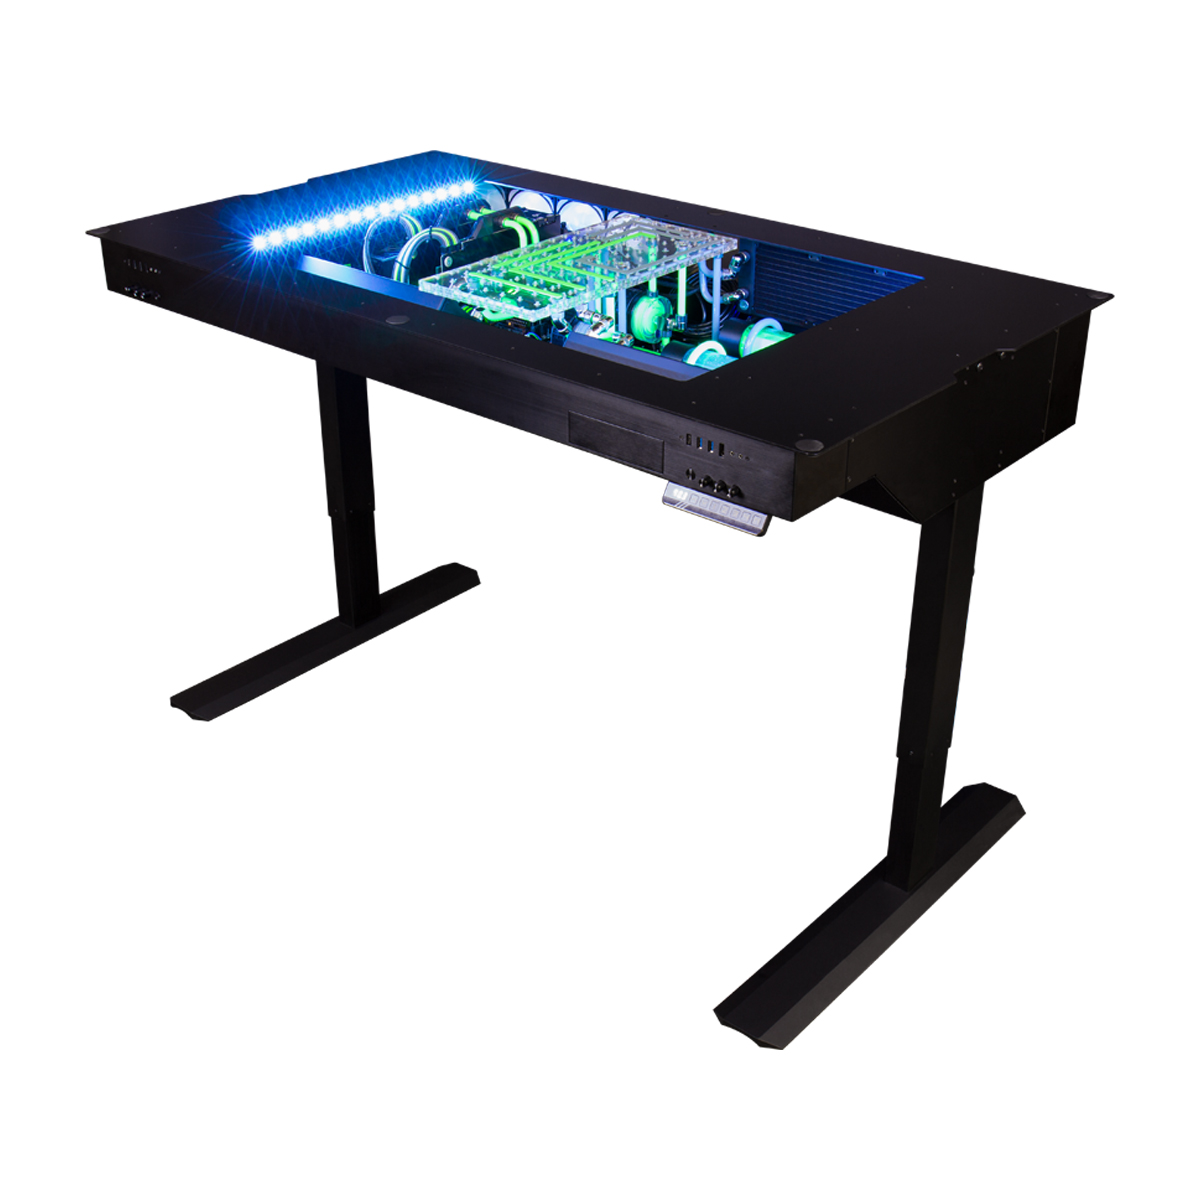 Infin8 - Infin8 Altar - Intel Core i9 10920X @ 4.6GHz Overclocked Watercooled Pro Gaming Desk PC